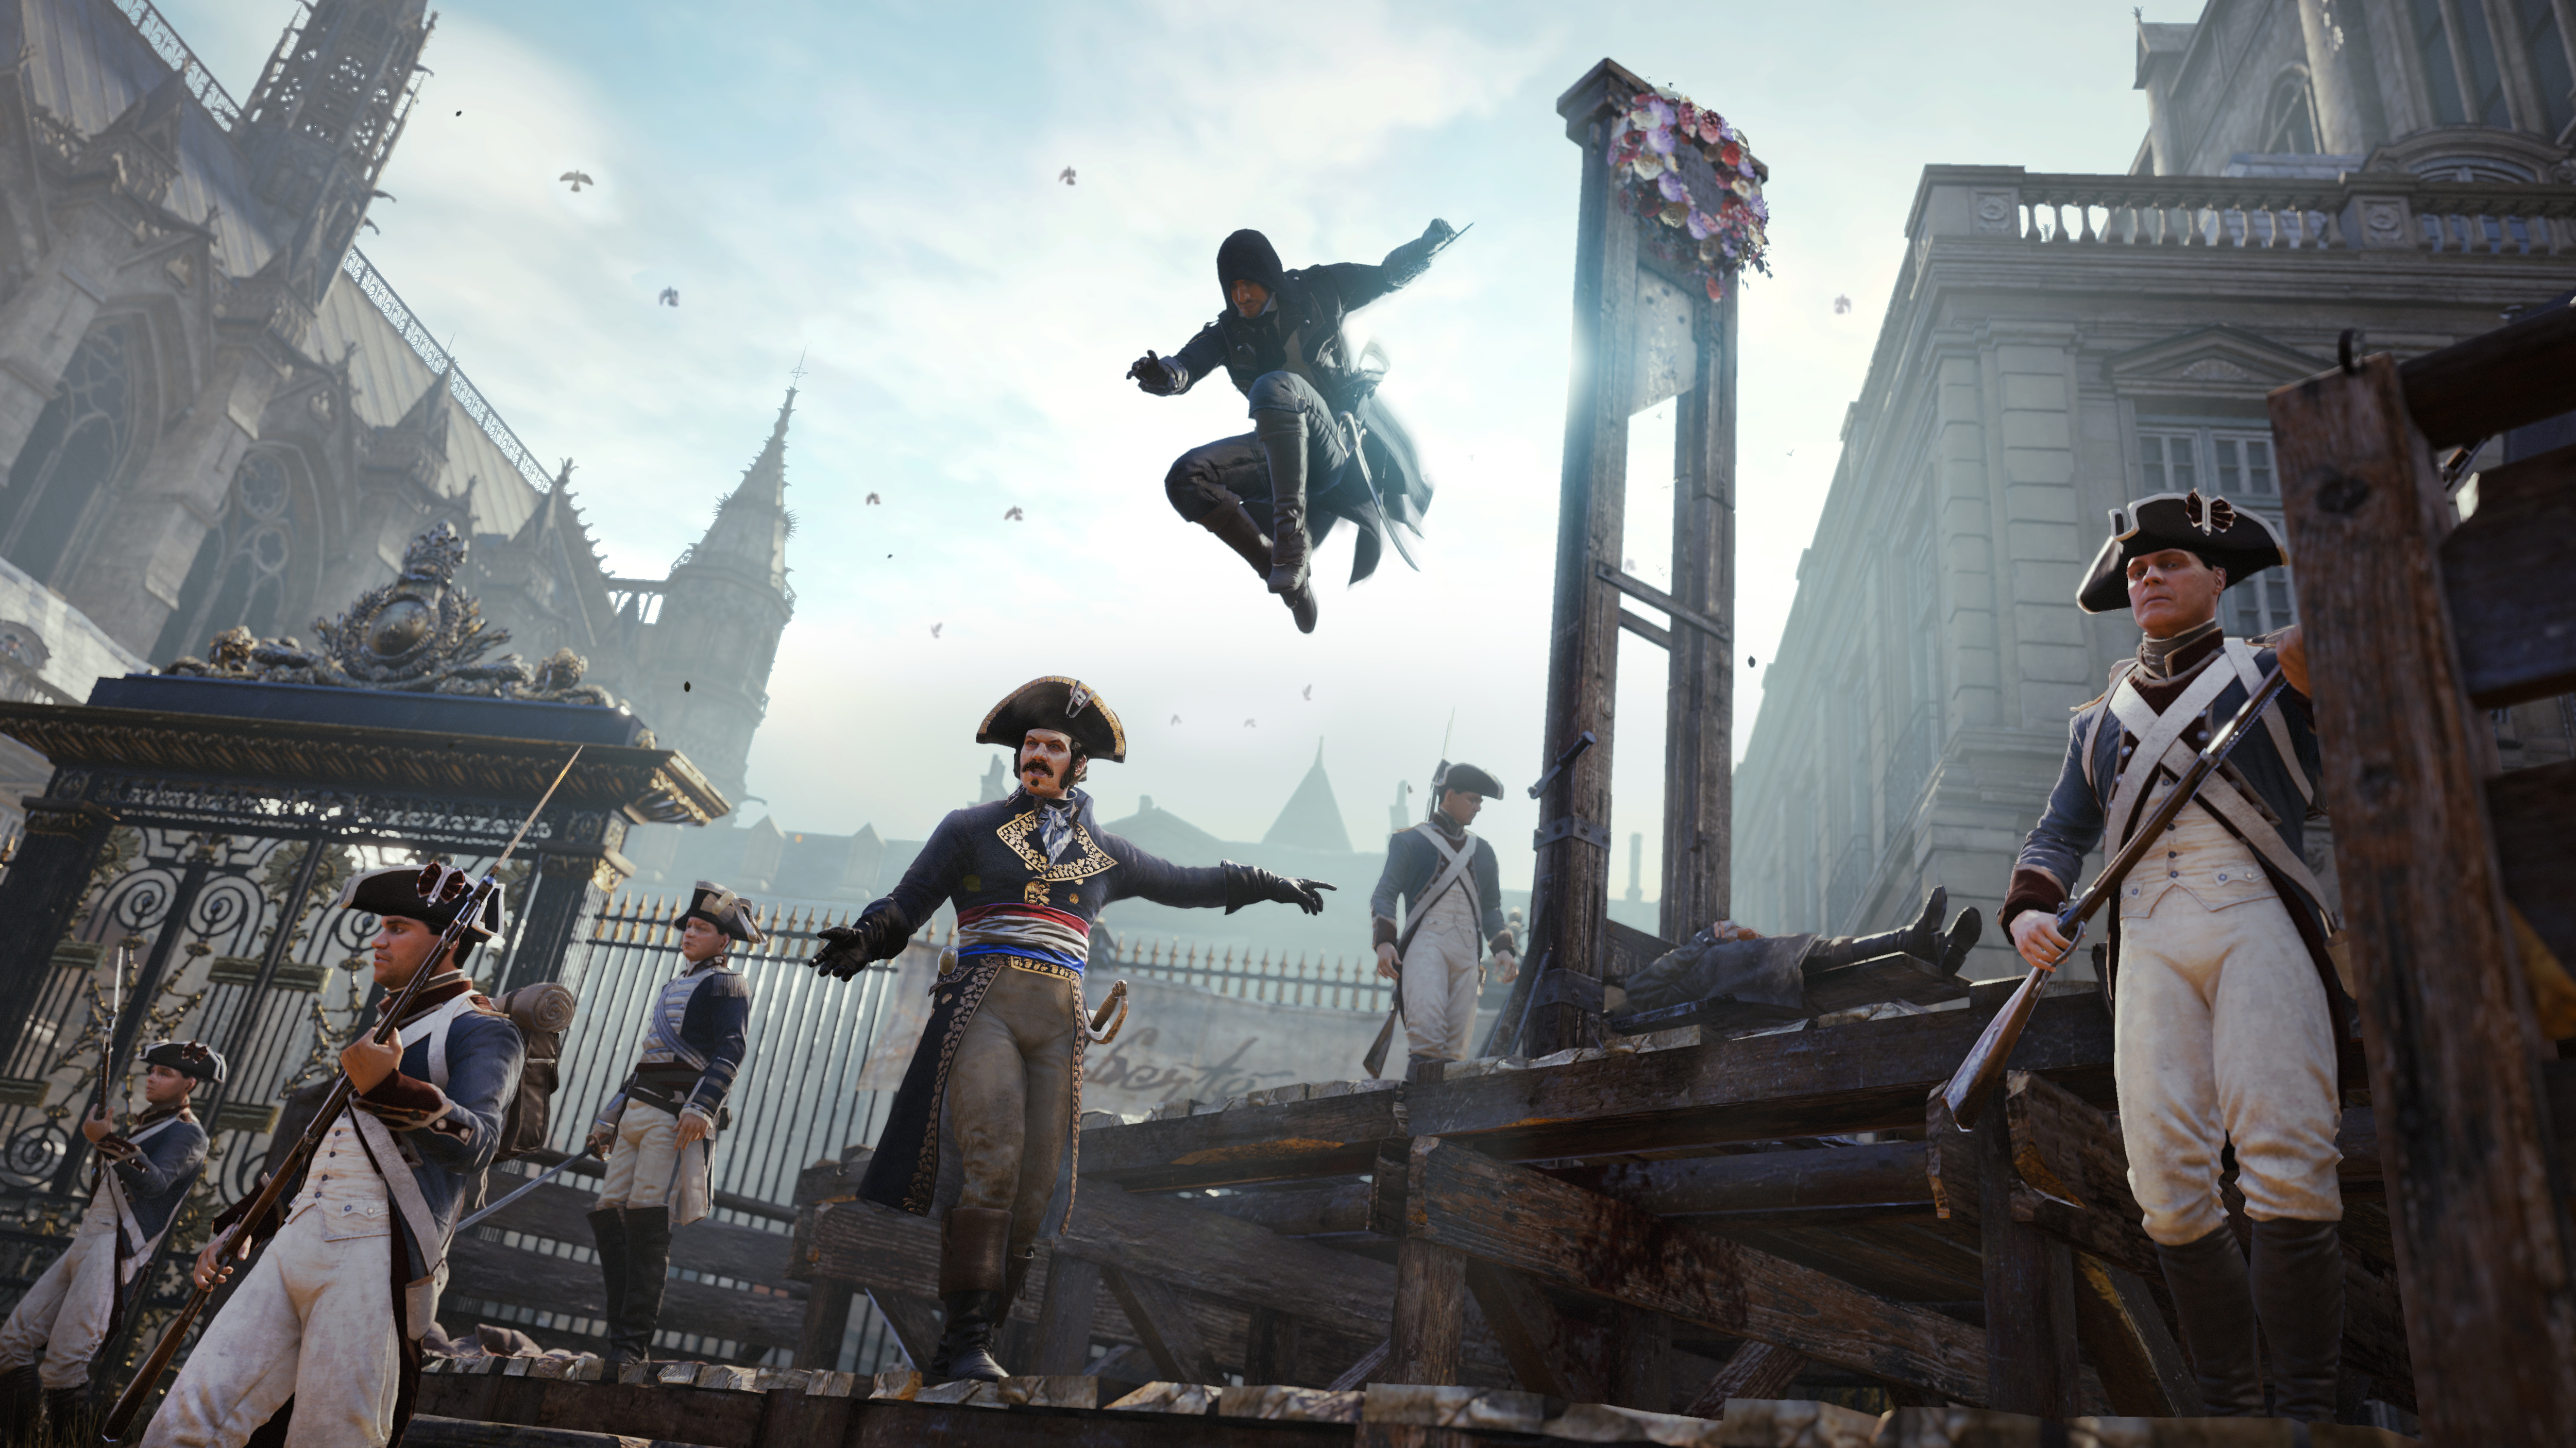 best Assassin's Creed games: an Assassin is jumping down onto a group of soldiers surrounding a guilltoine